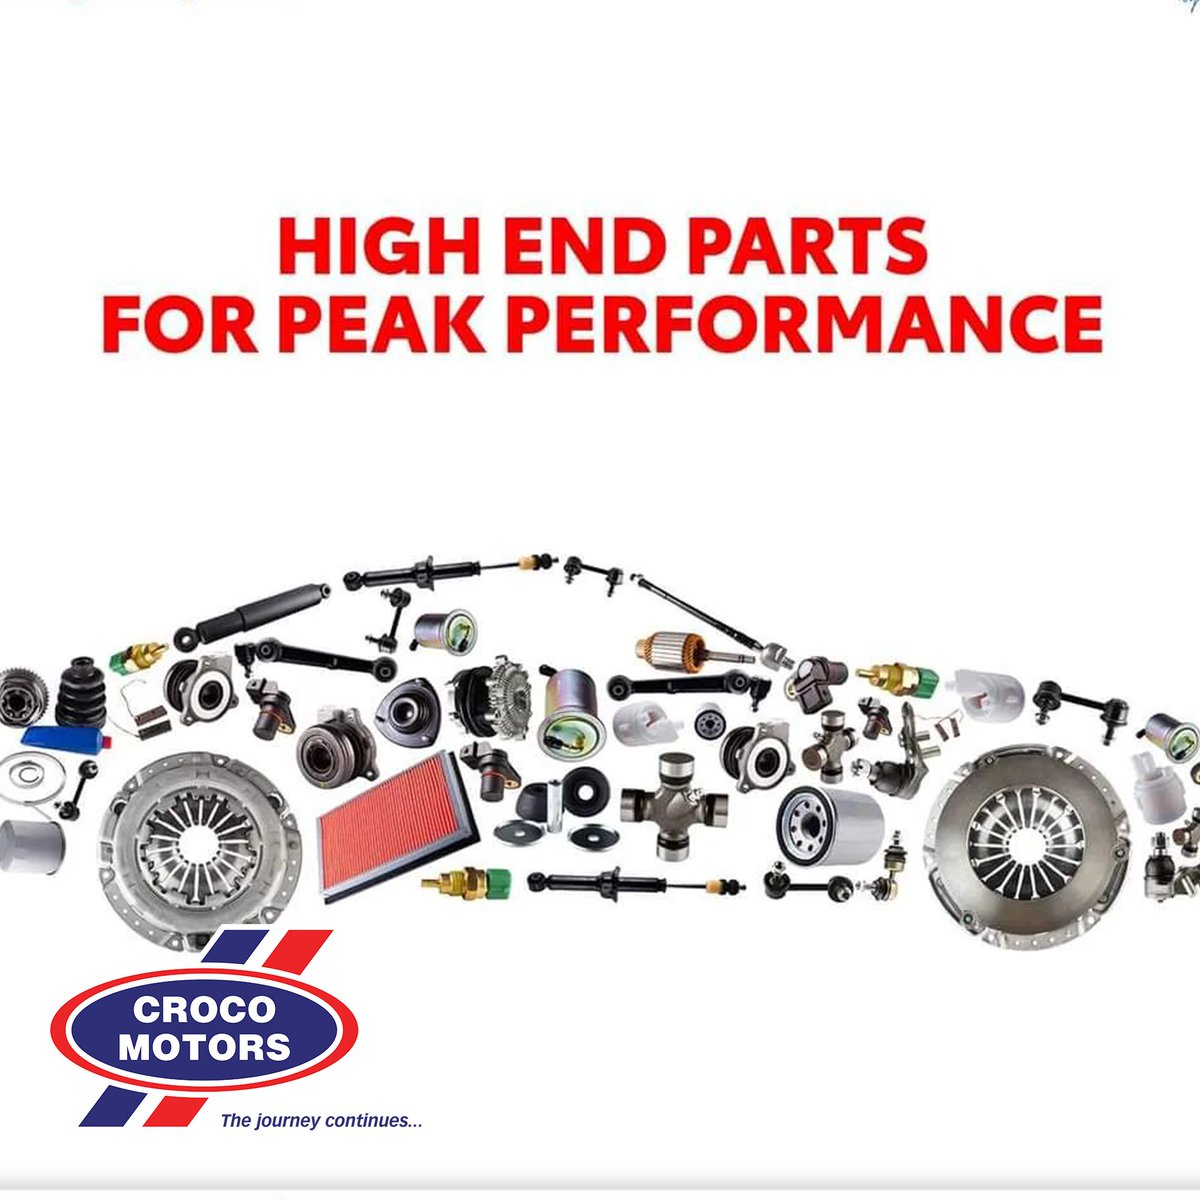 Only use genuine parts. Visit any of our service centers for a tune up to see what your car can really do. #vehicleservice #repairs #maintainance #crocomotors #thejourneycontinues #harare #Zimbabwe